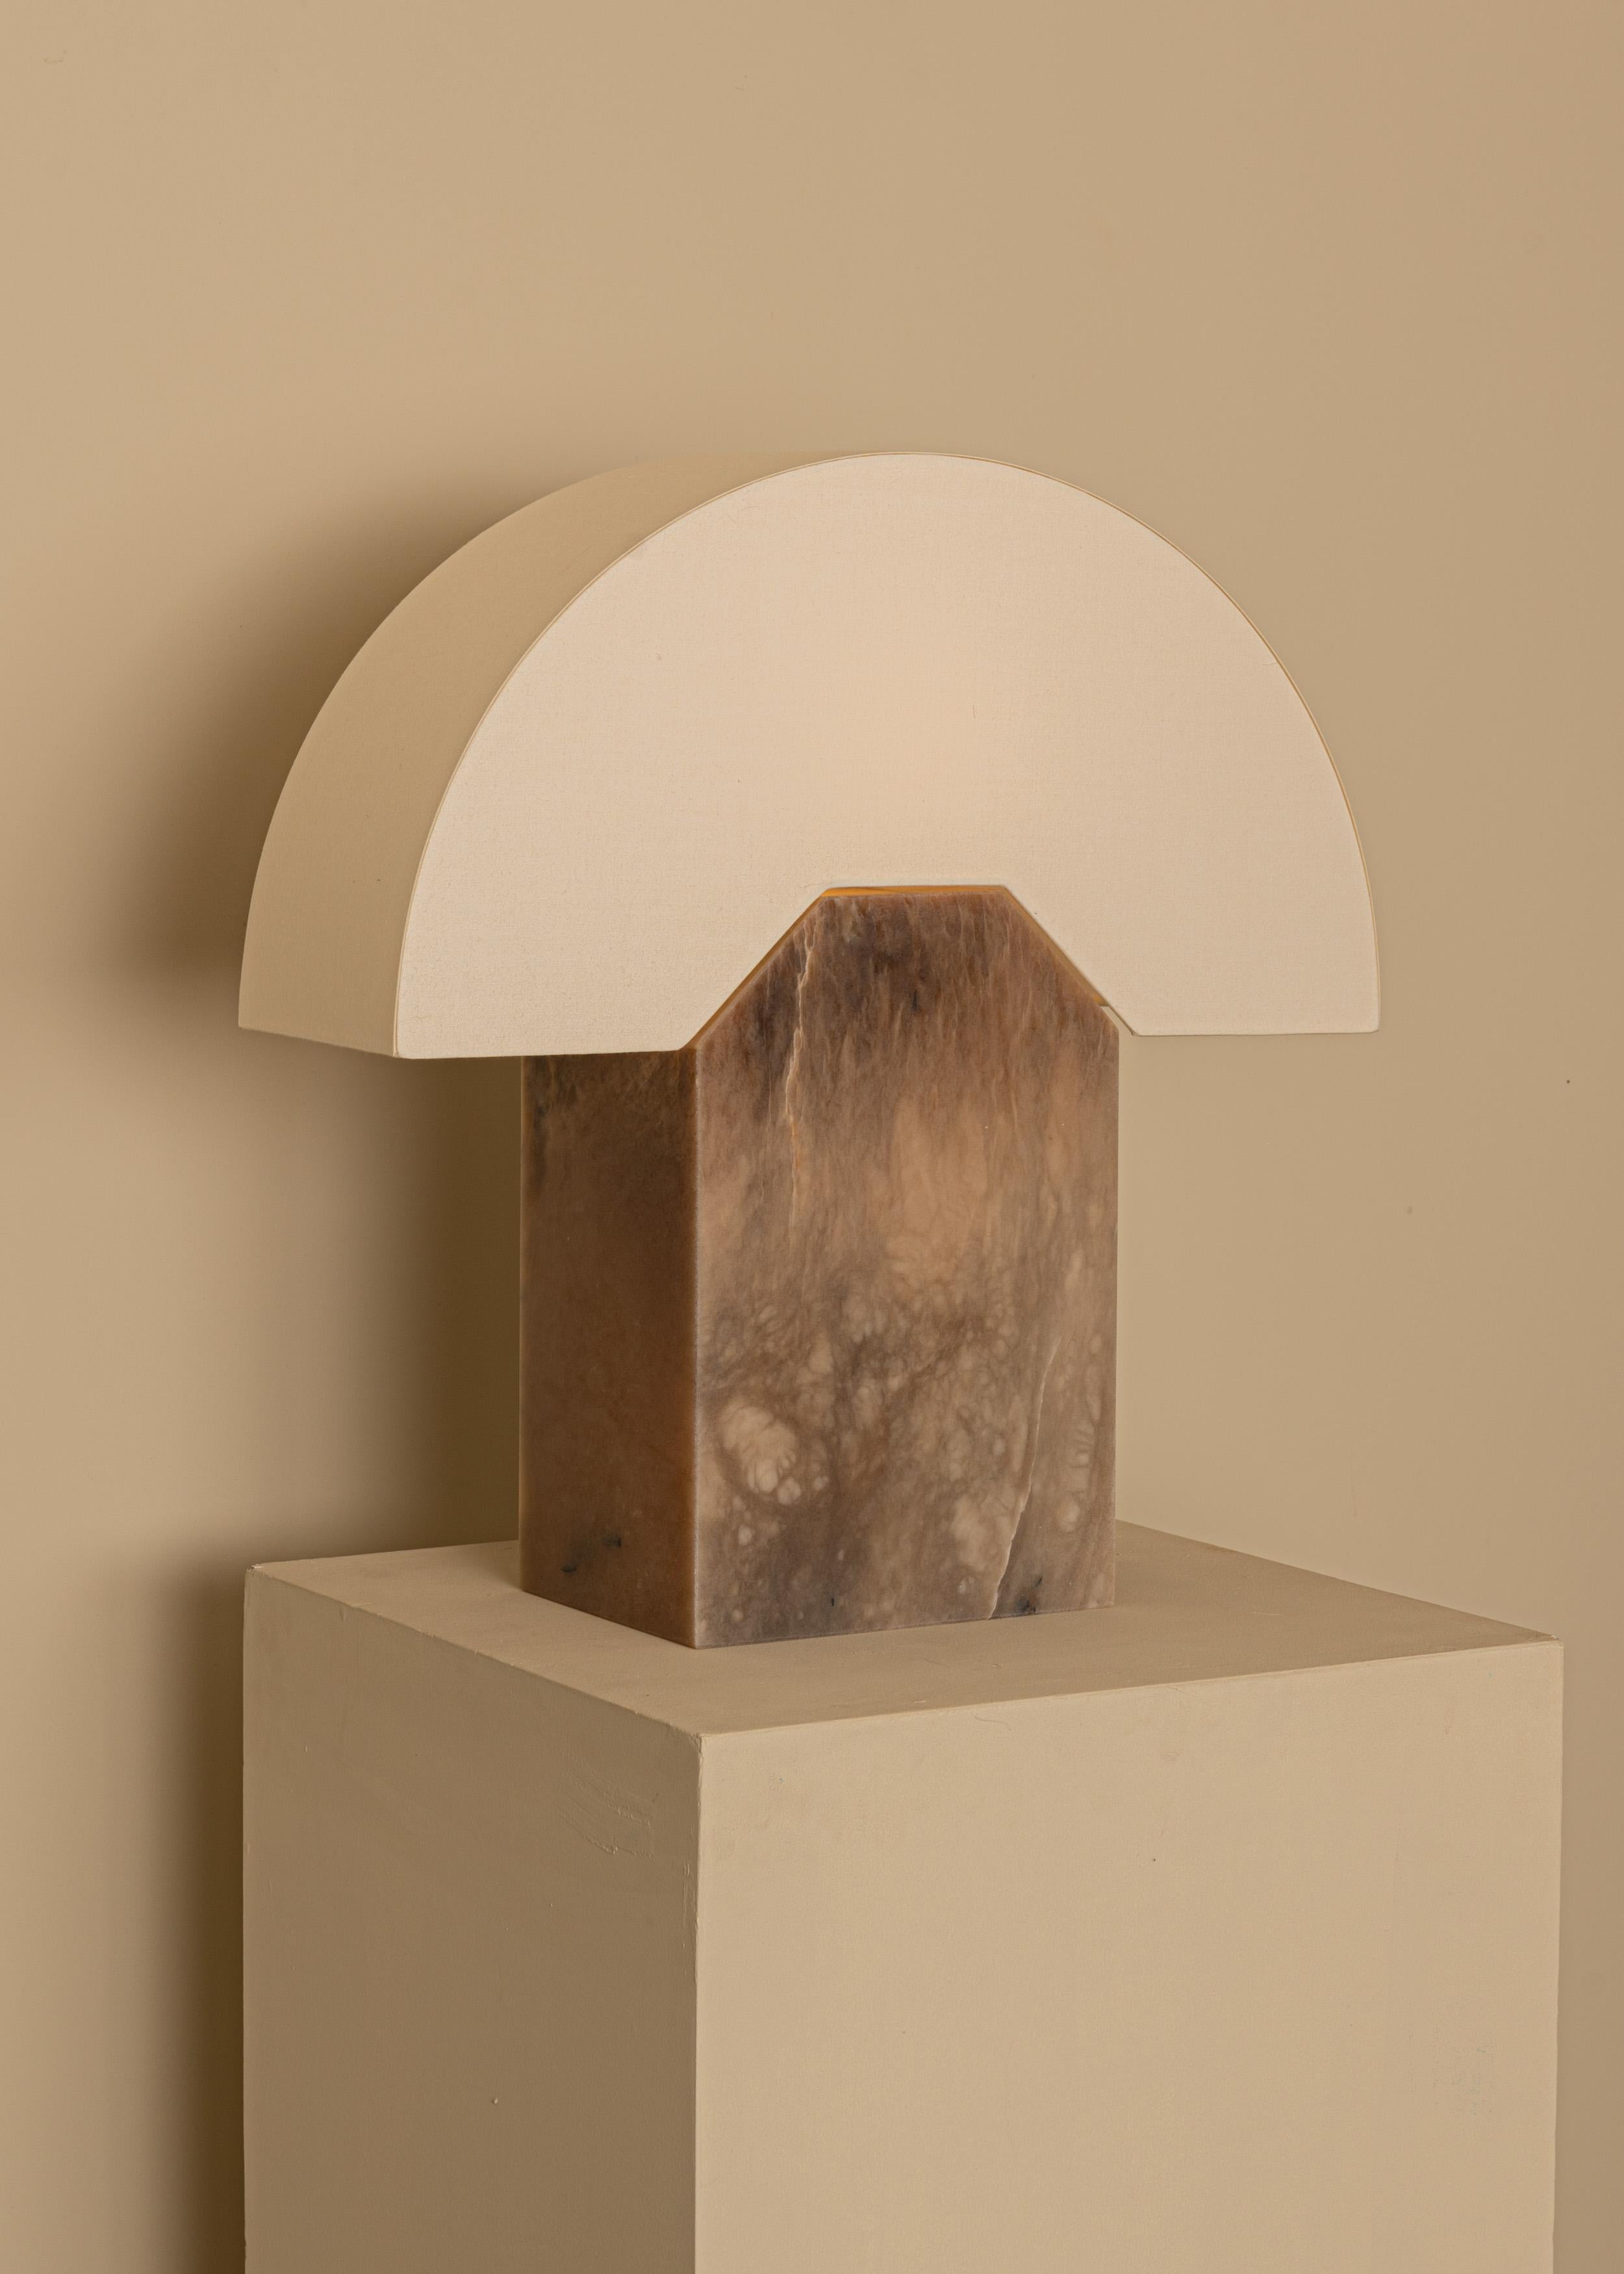 TobaccoAlabaster Edna Table Lamp by Simone & MarcelMarcel
Dimensions: D 15 x W 44 x H 46 cm.
Materials: Cotton, brass and white alabaster.

Also available in different marbles and ceramics. Custom options available on request. Please contact us.